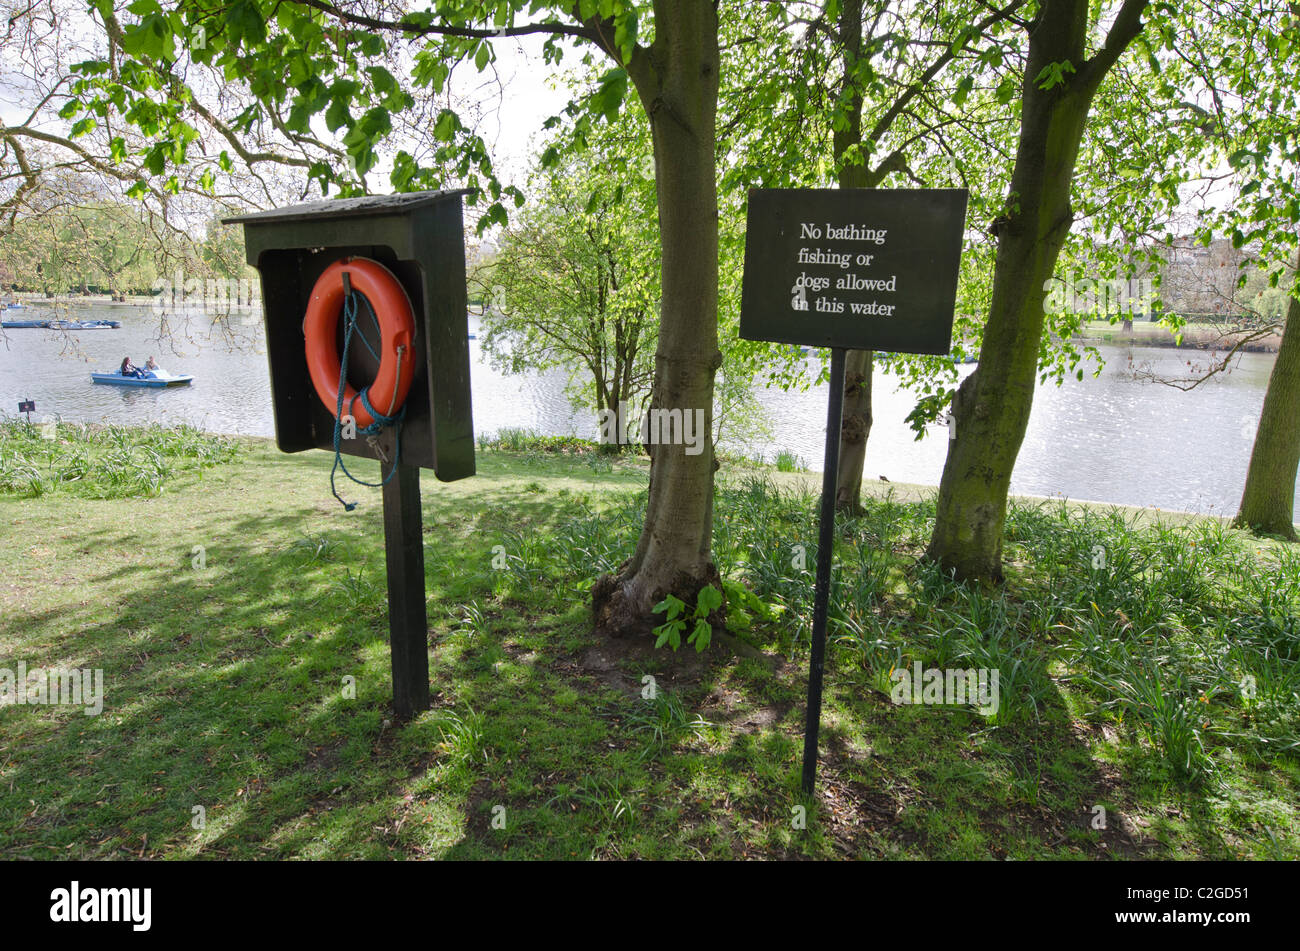 Life ring and 'No bathing fishing or dogs allowed in this water' sign. Regent's Park lake Camden London Uk. Stock Photo